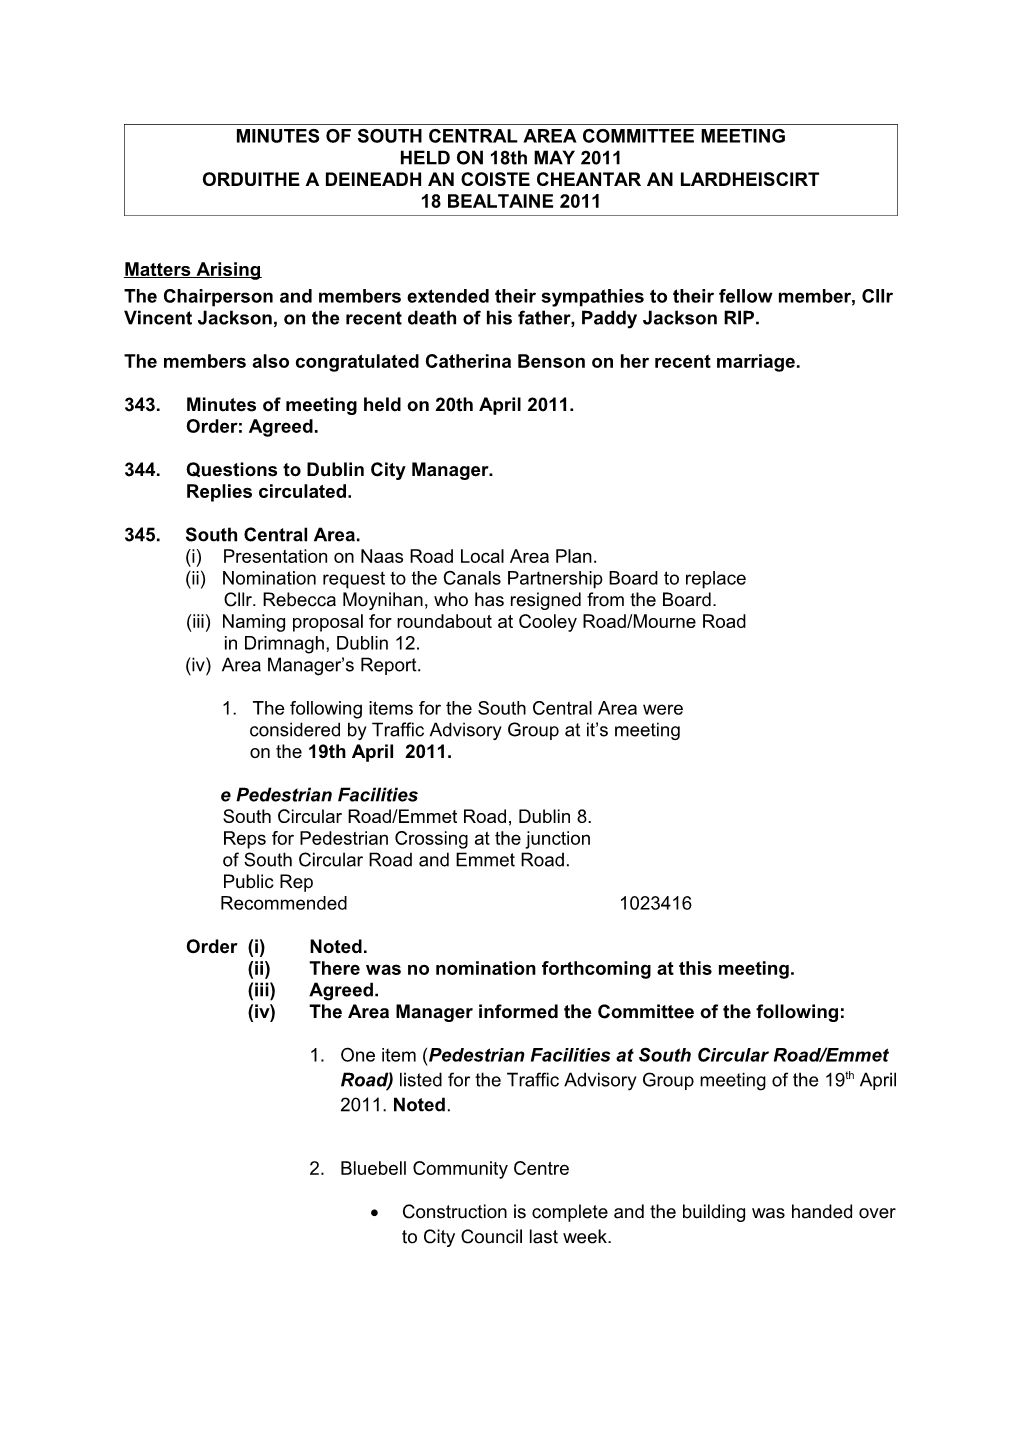 Minutes of South Central Area Committee Meeting